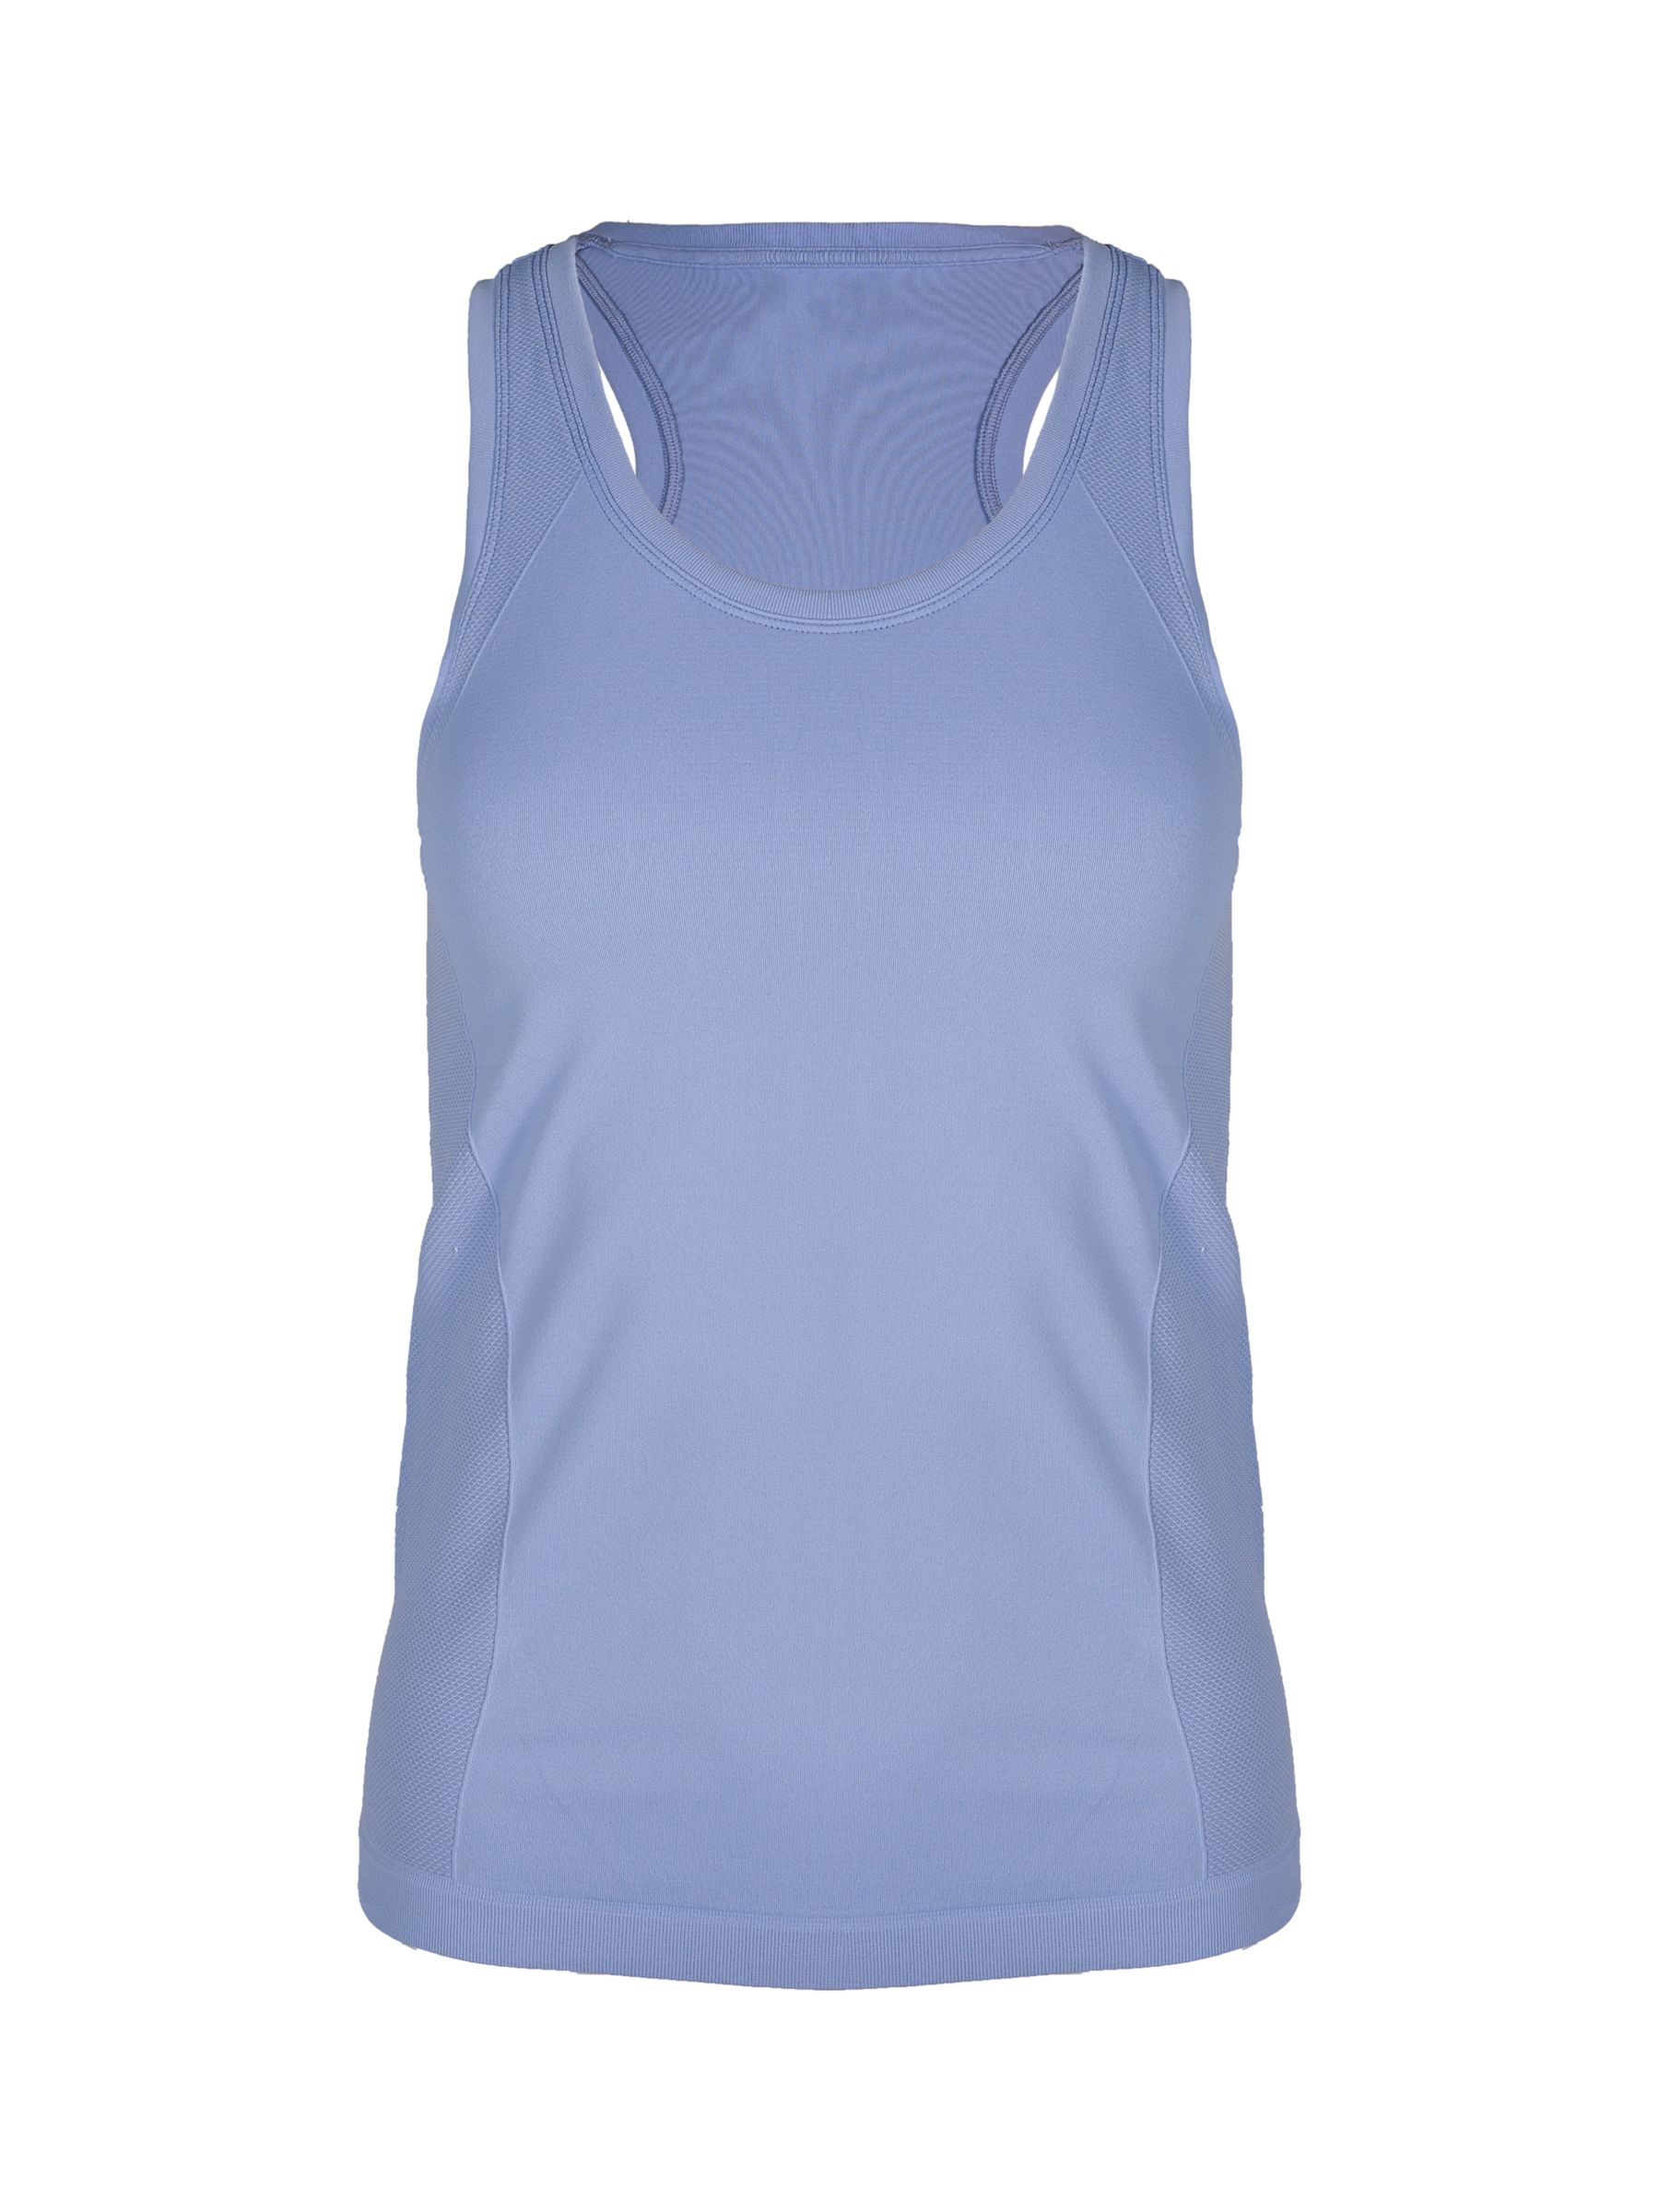 Buy Sweaty Betty Athlete Seamless Workout Tank Top Online at johnlewis.com